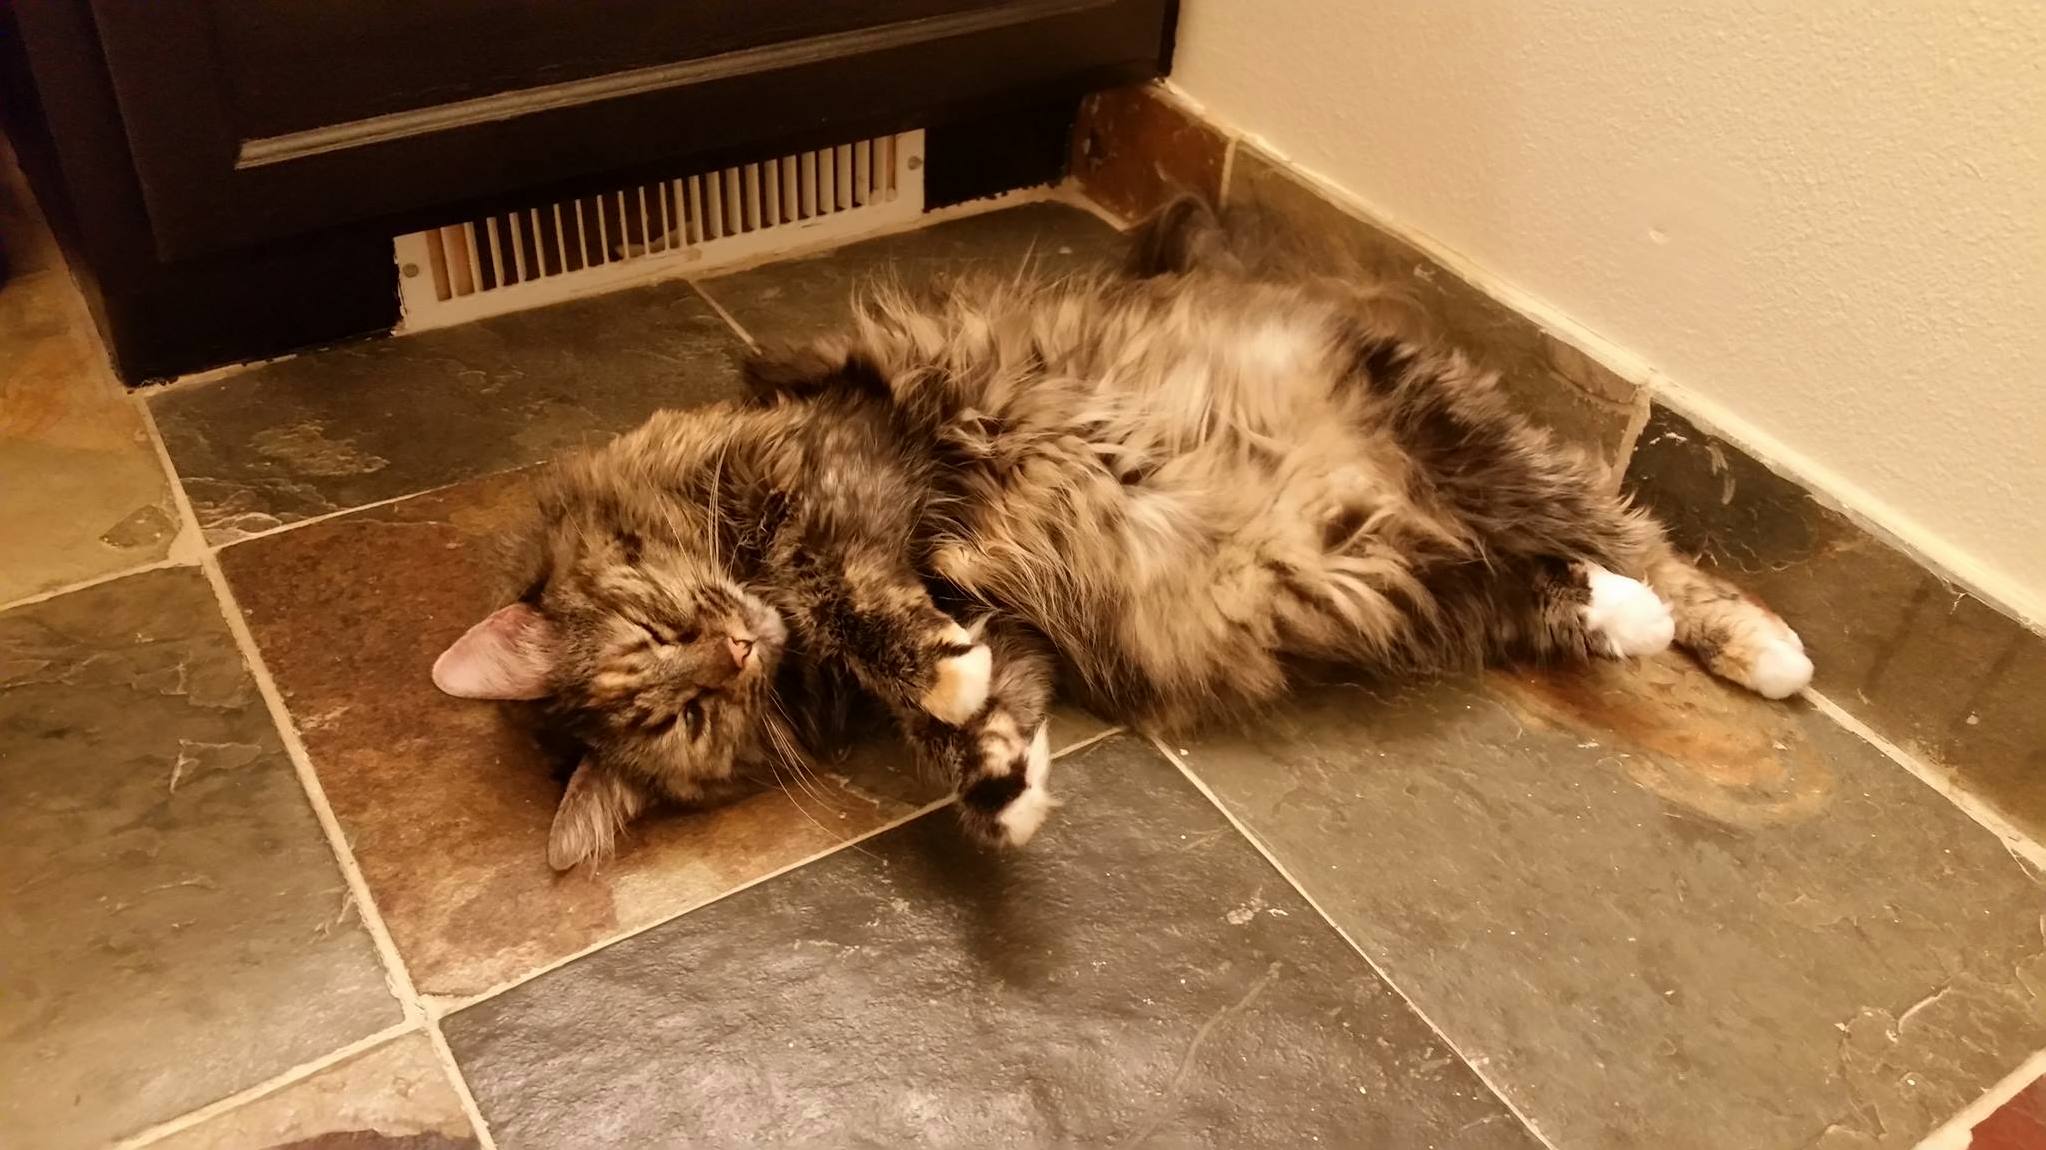 She spends a lot of time flopped like this in front of the vent. i swear we keep the entire house warm…